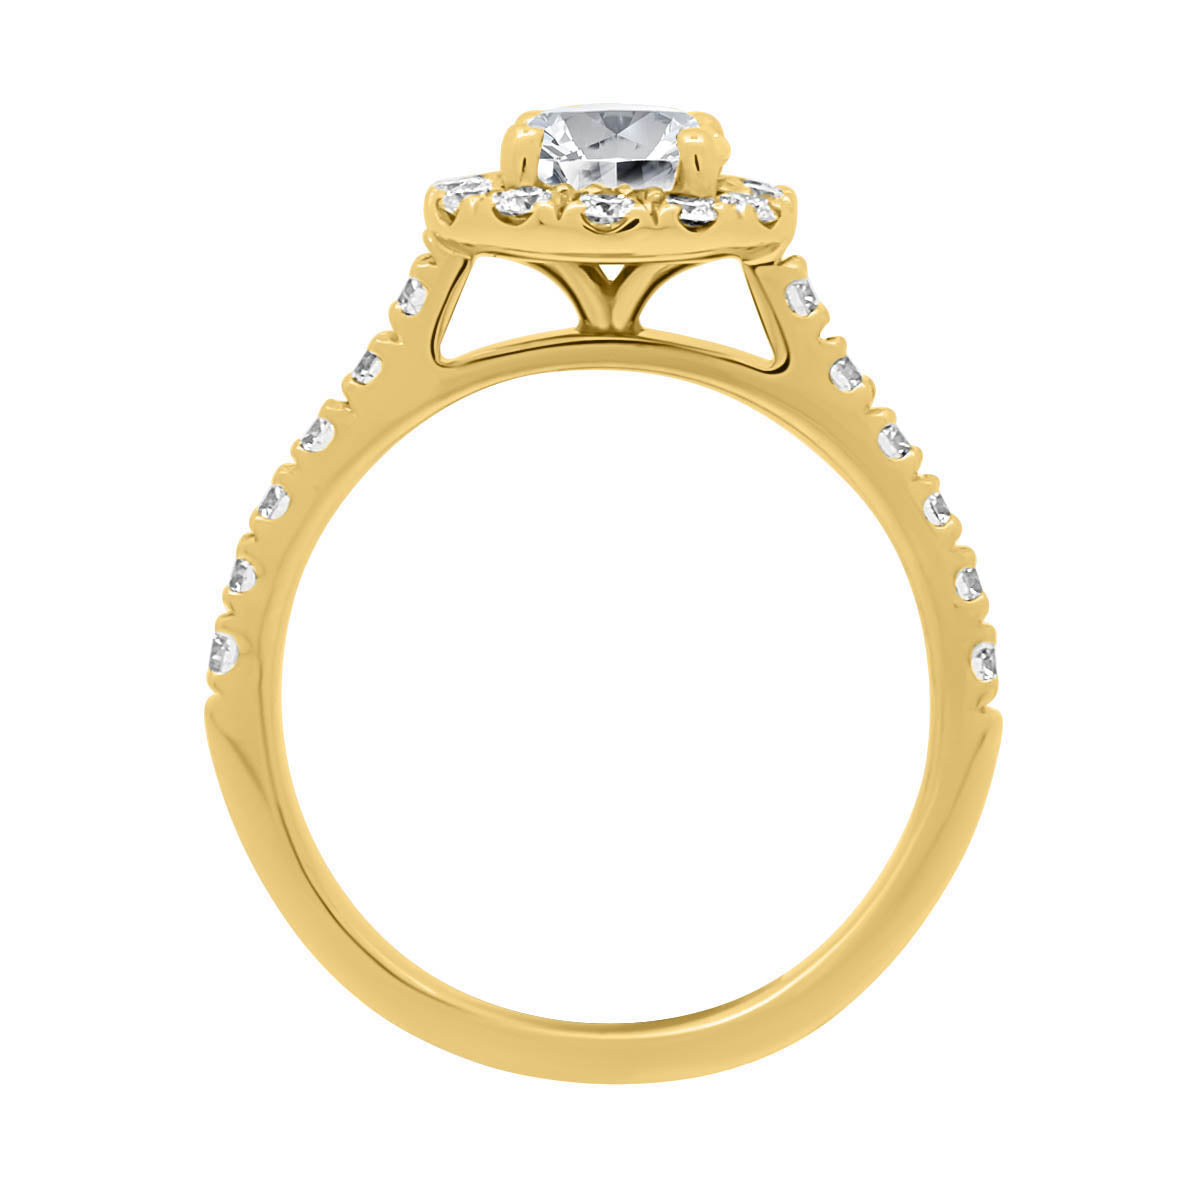 Halo Engagement Ring Diamond Band in yellow gold  standing upright